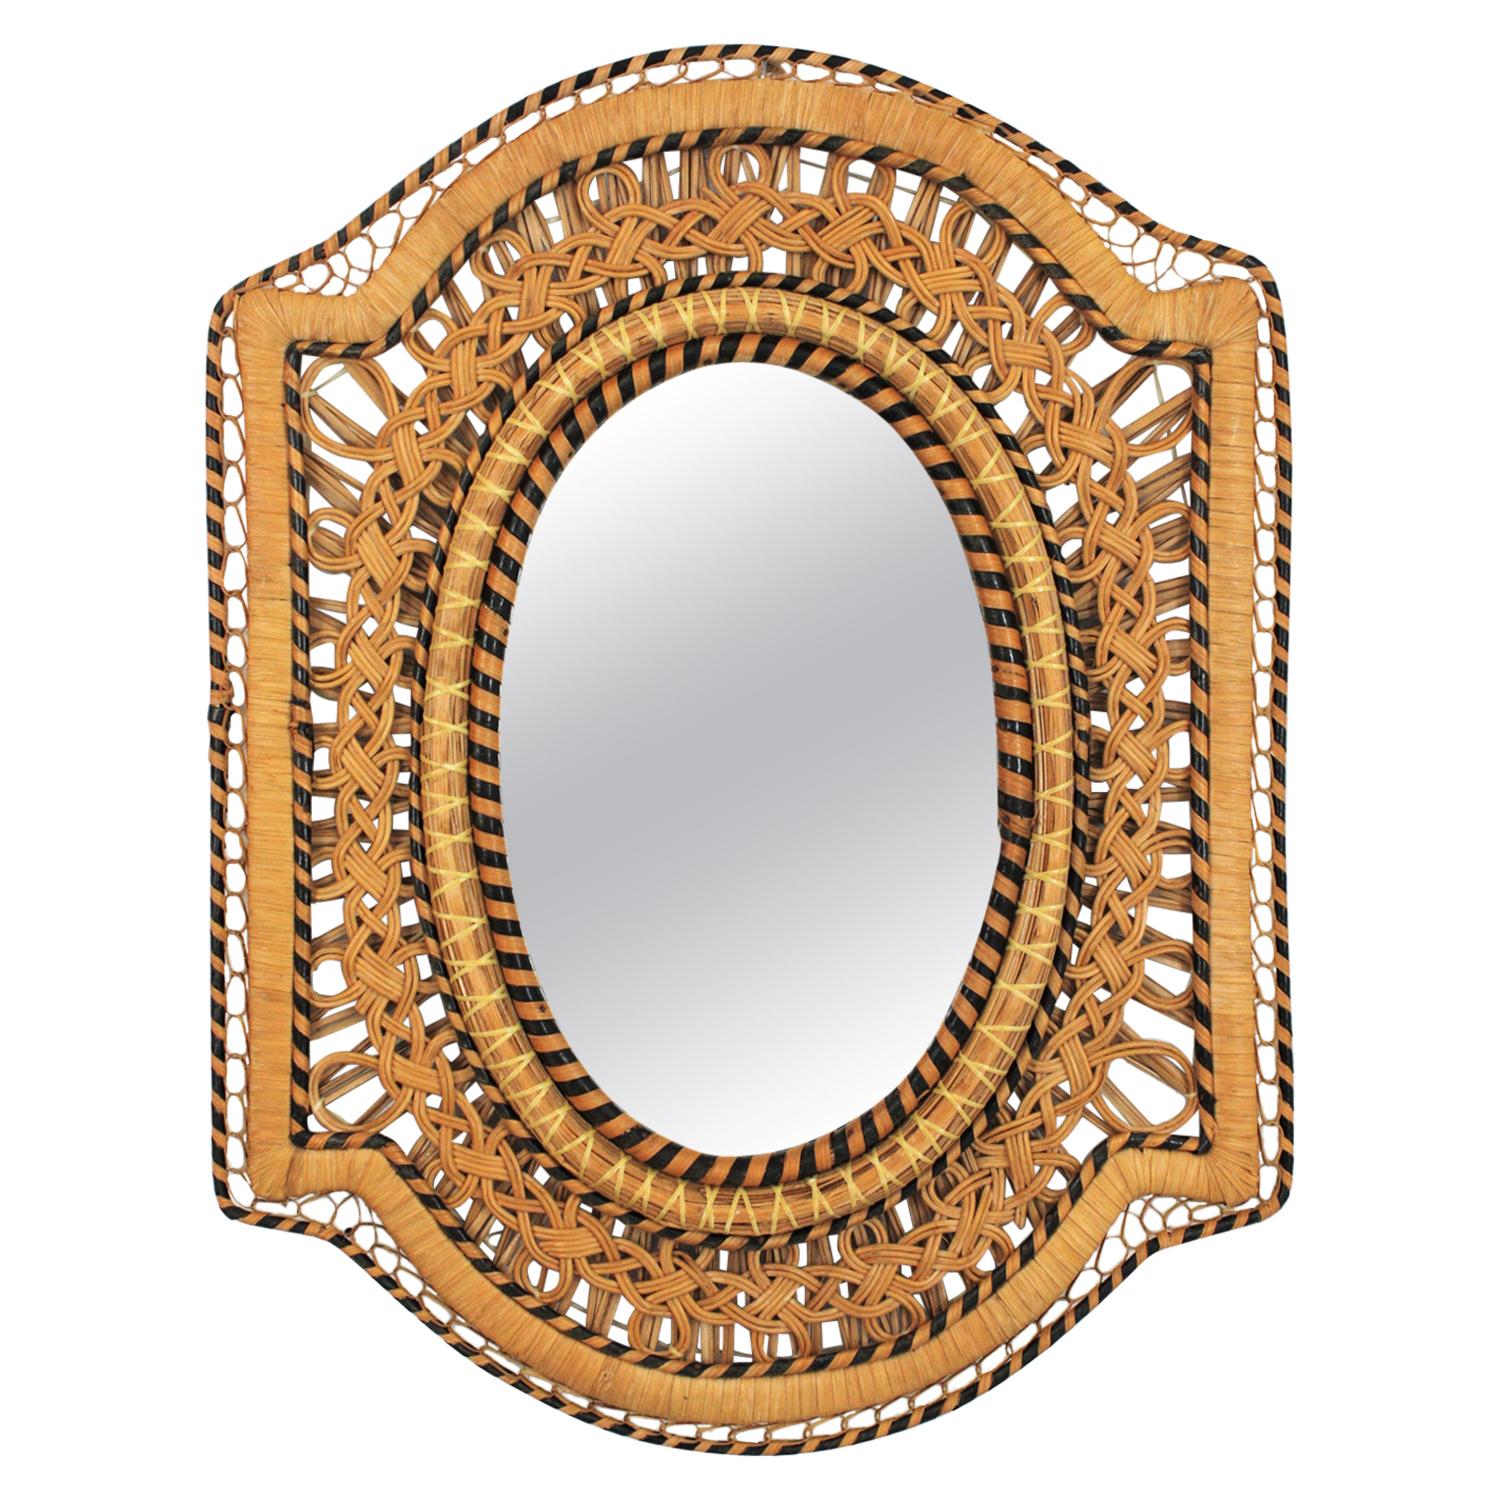 Rattan and Wicker Braided Emmanuelle Peacock Mirror, 1970s